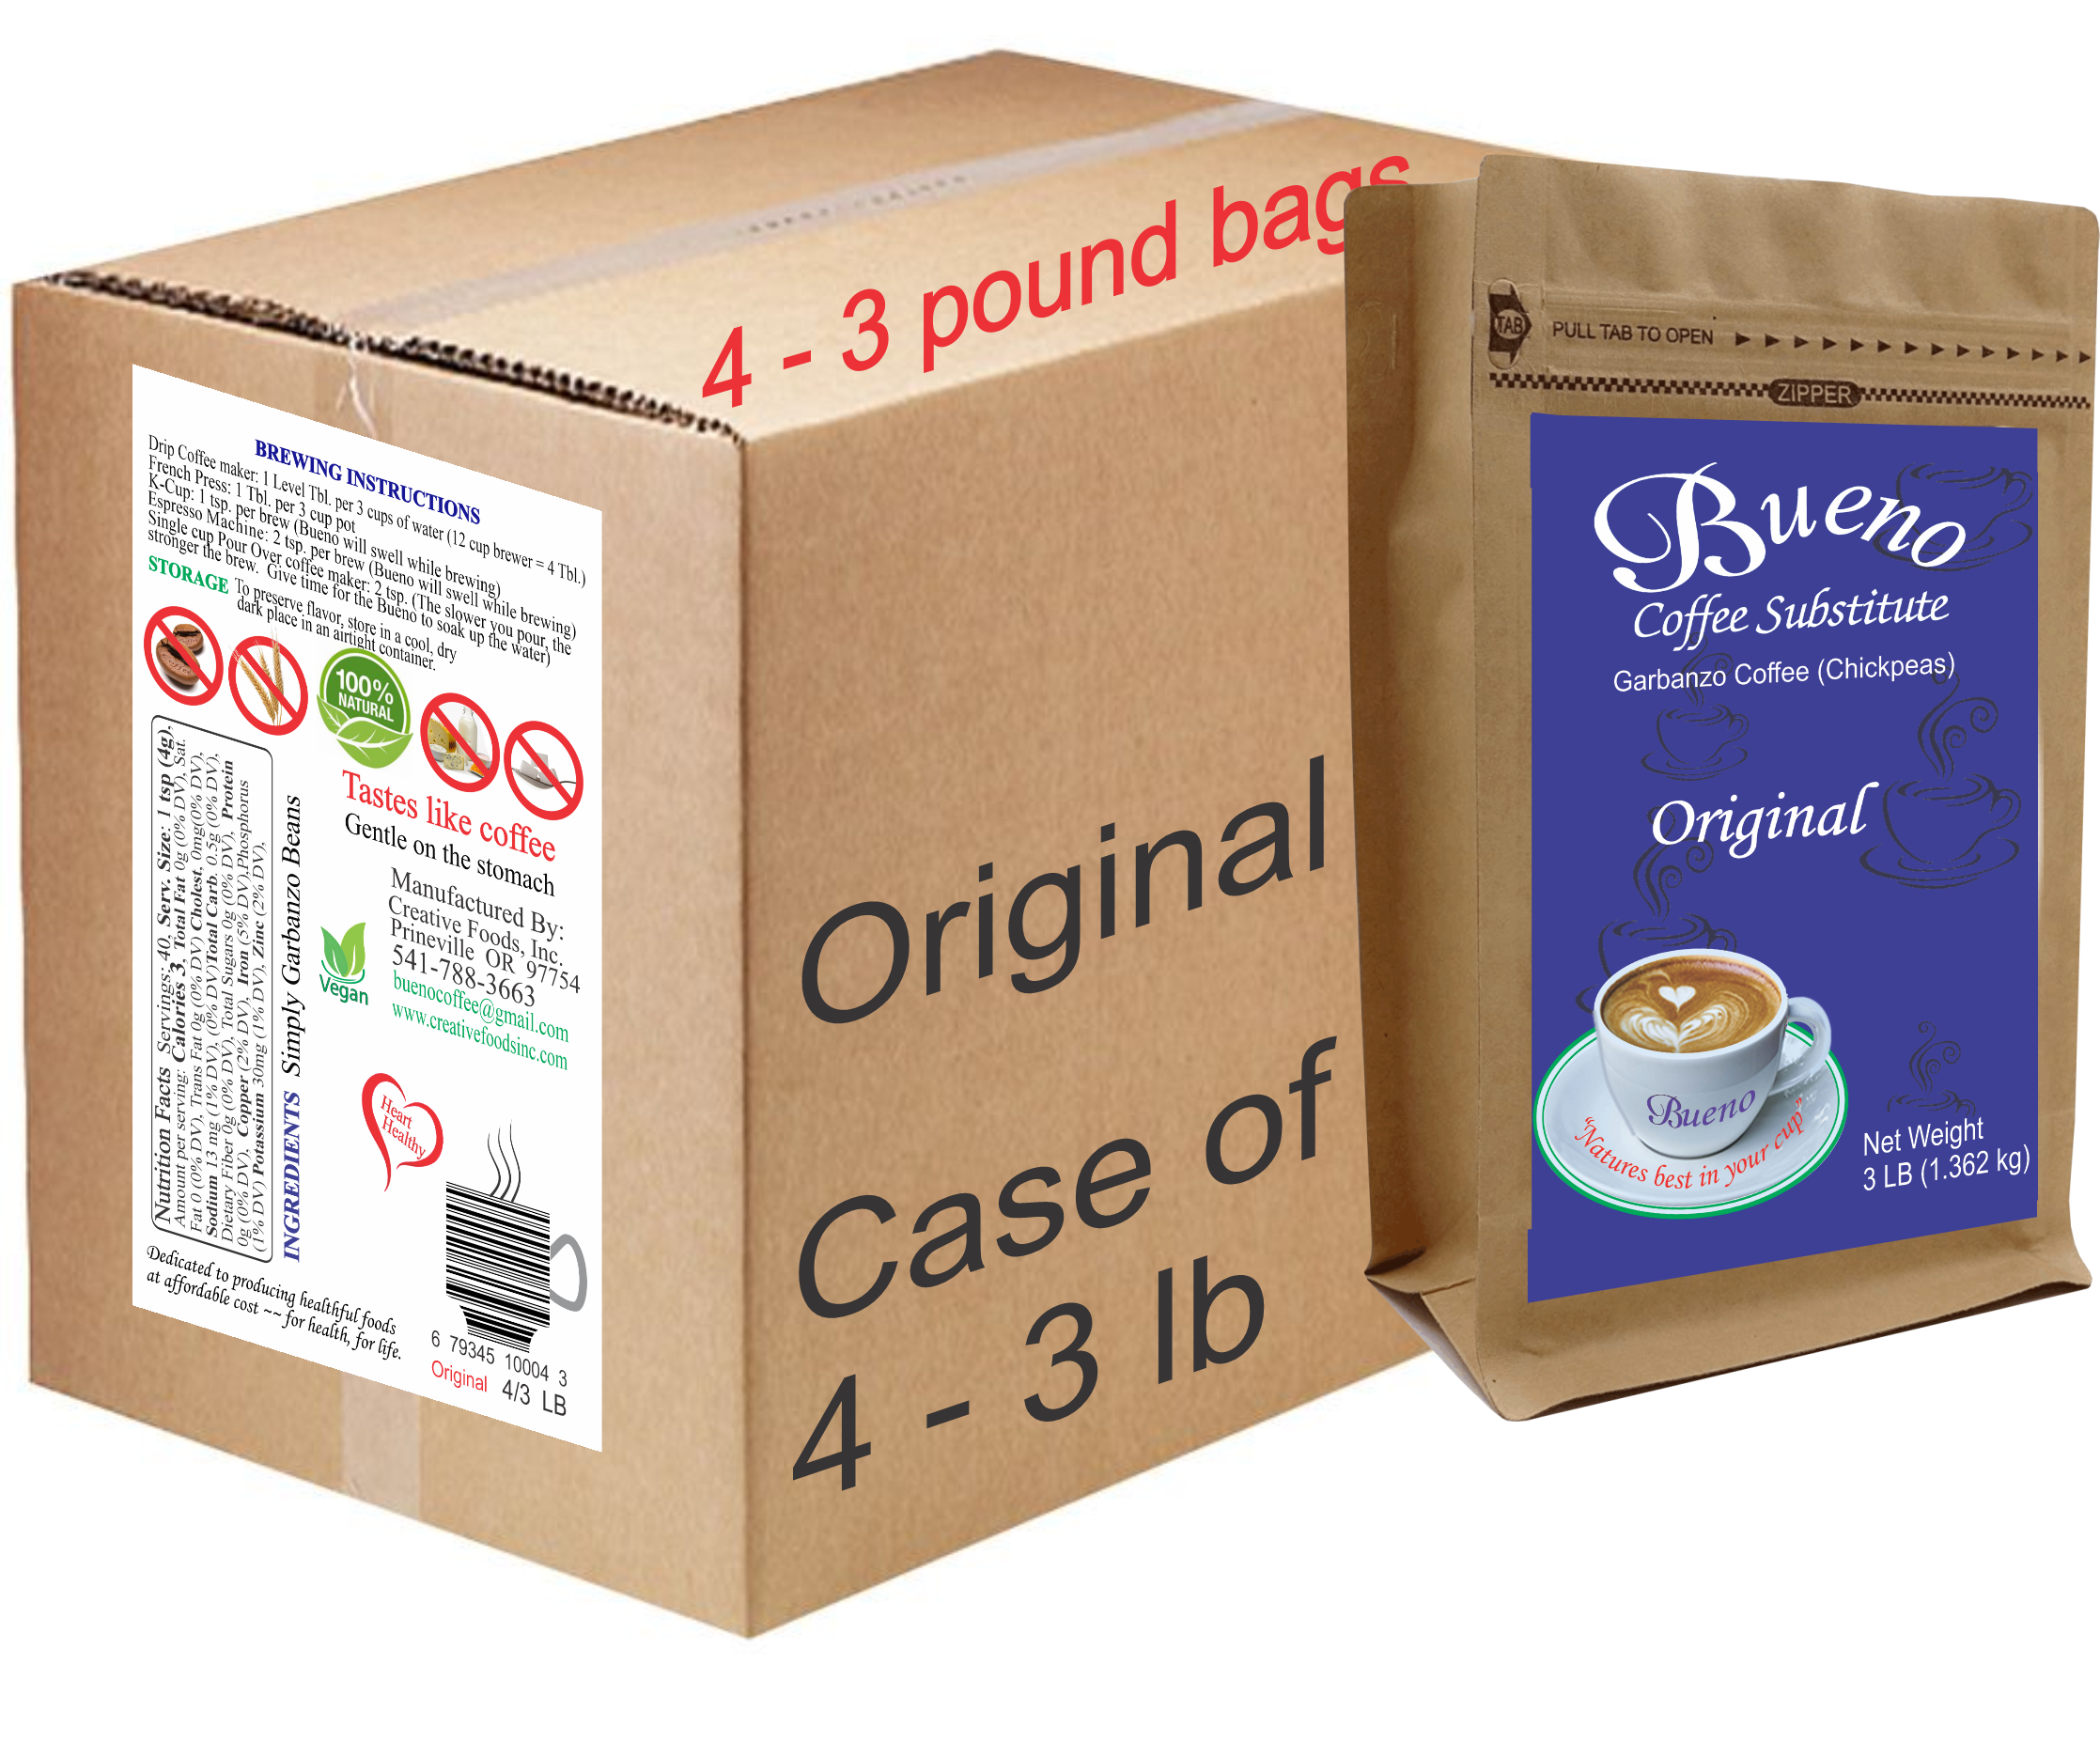 Original - case of 4 - 3 pound packages